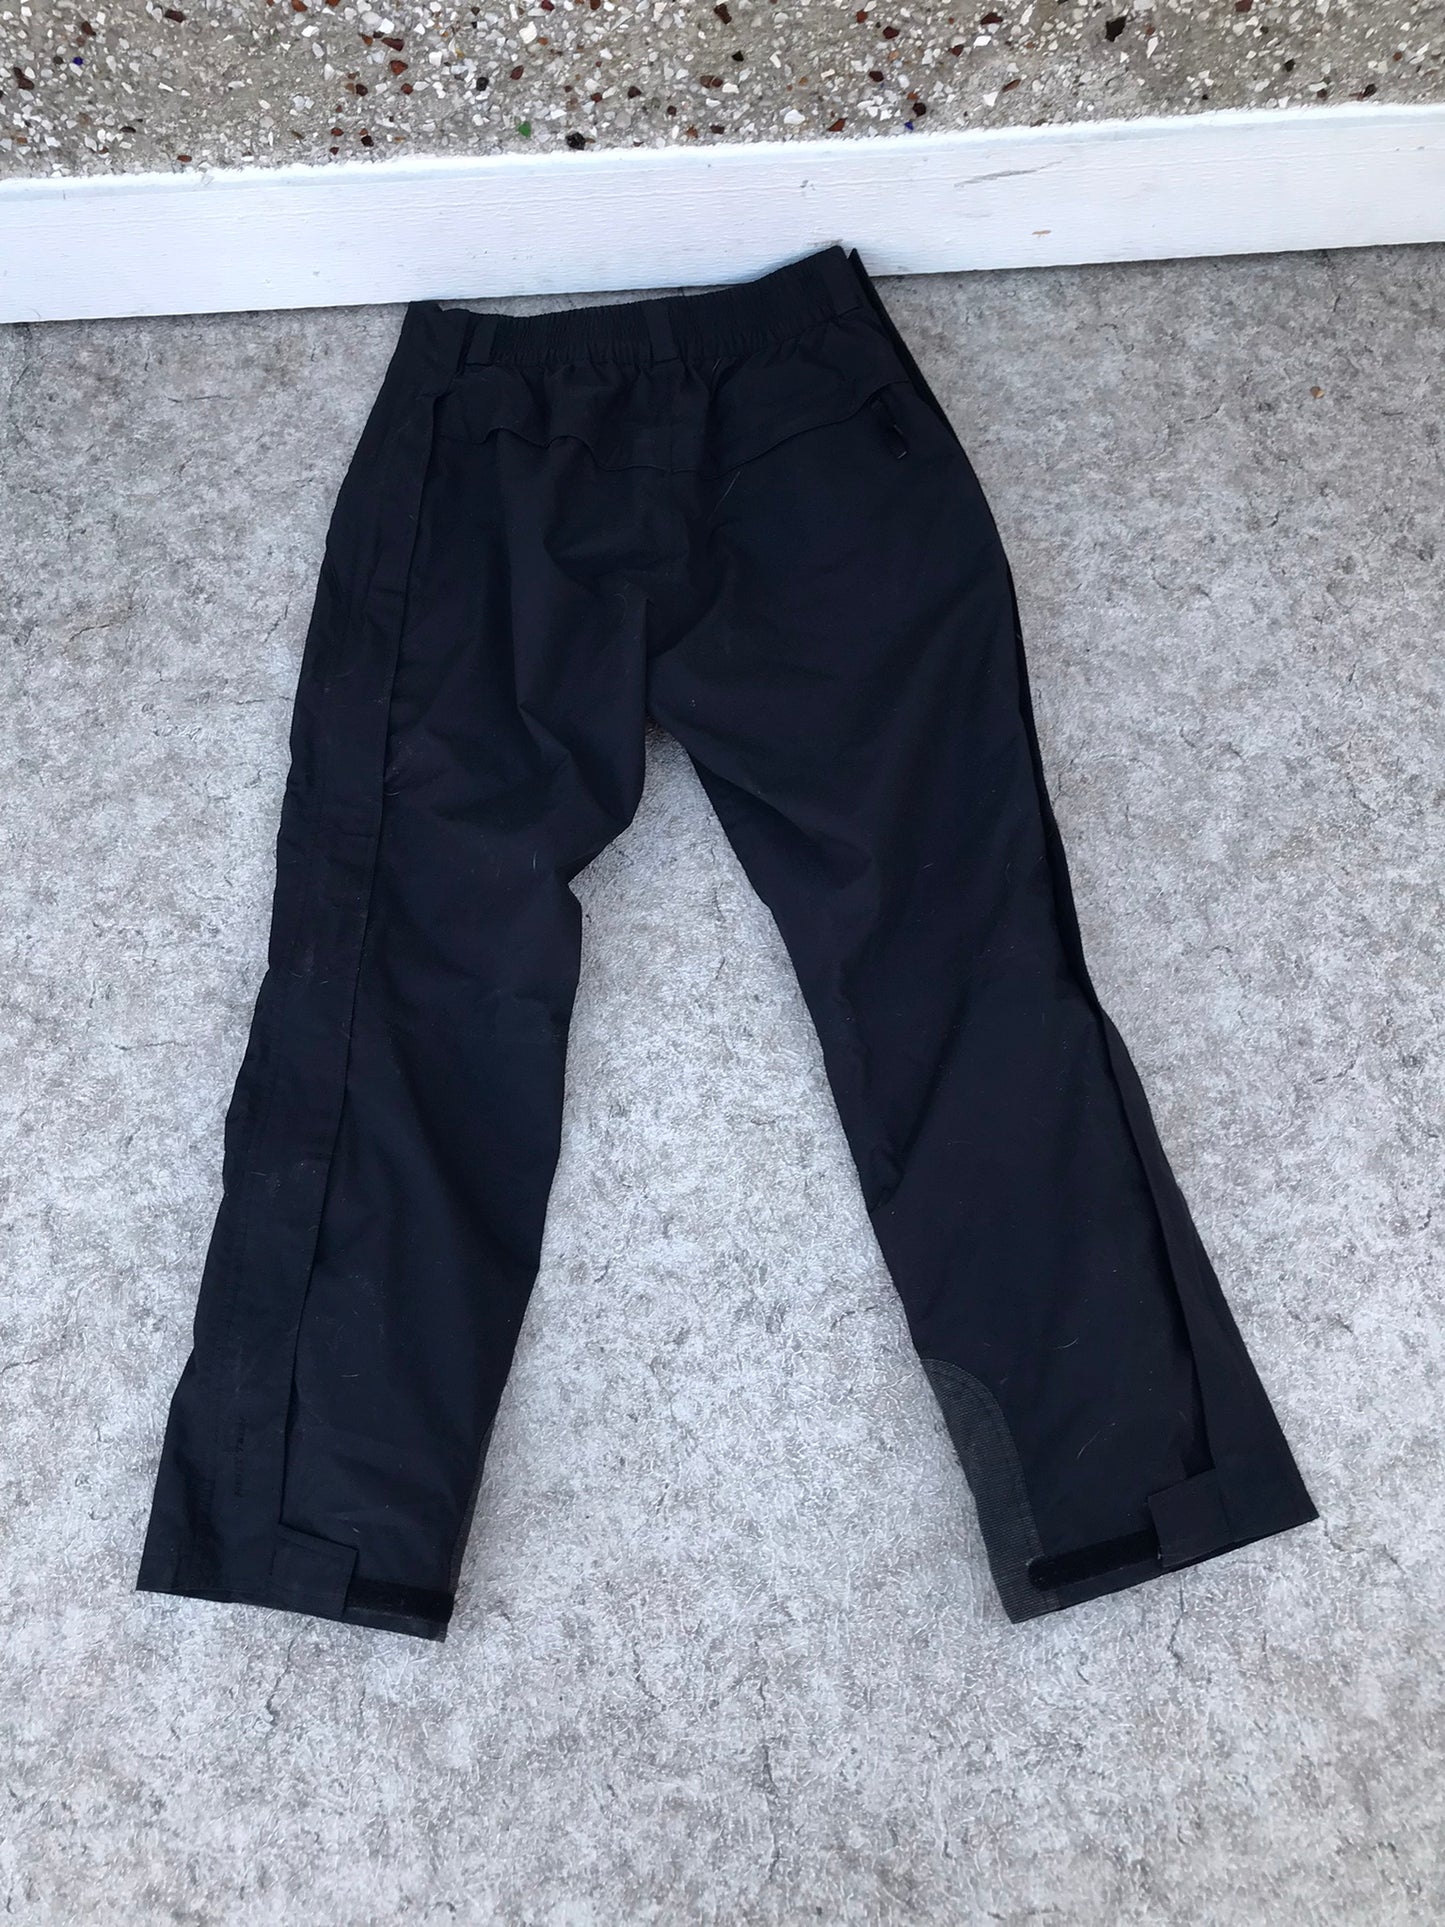 Snow Pants Men's Size X Large Helly Hansen With Full Zippers Up Both Sides Waterproof Black Like New